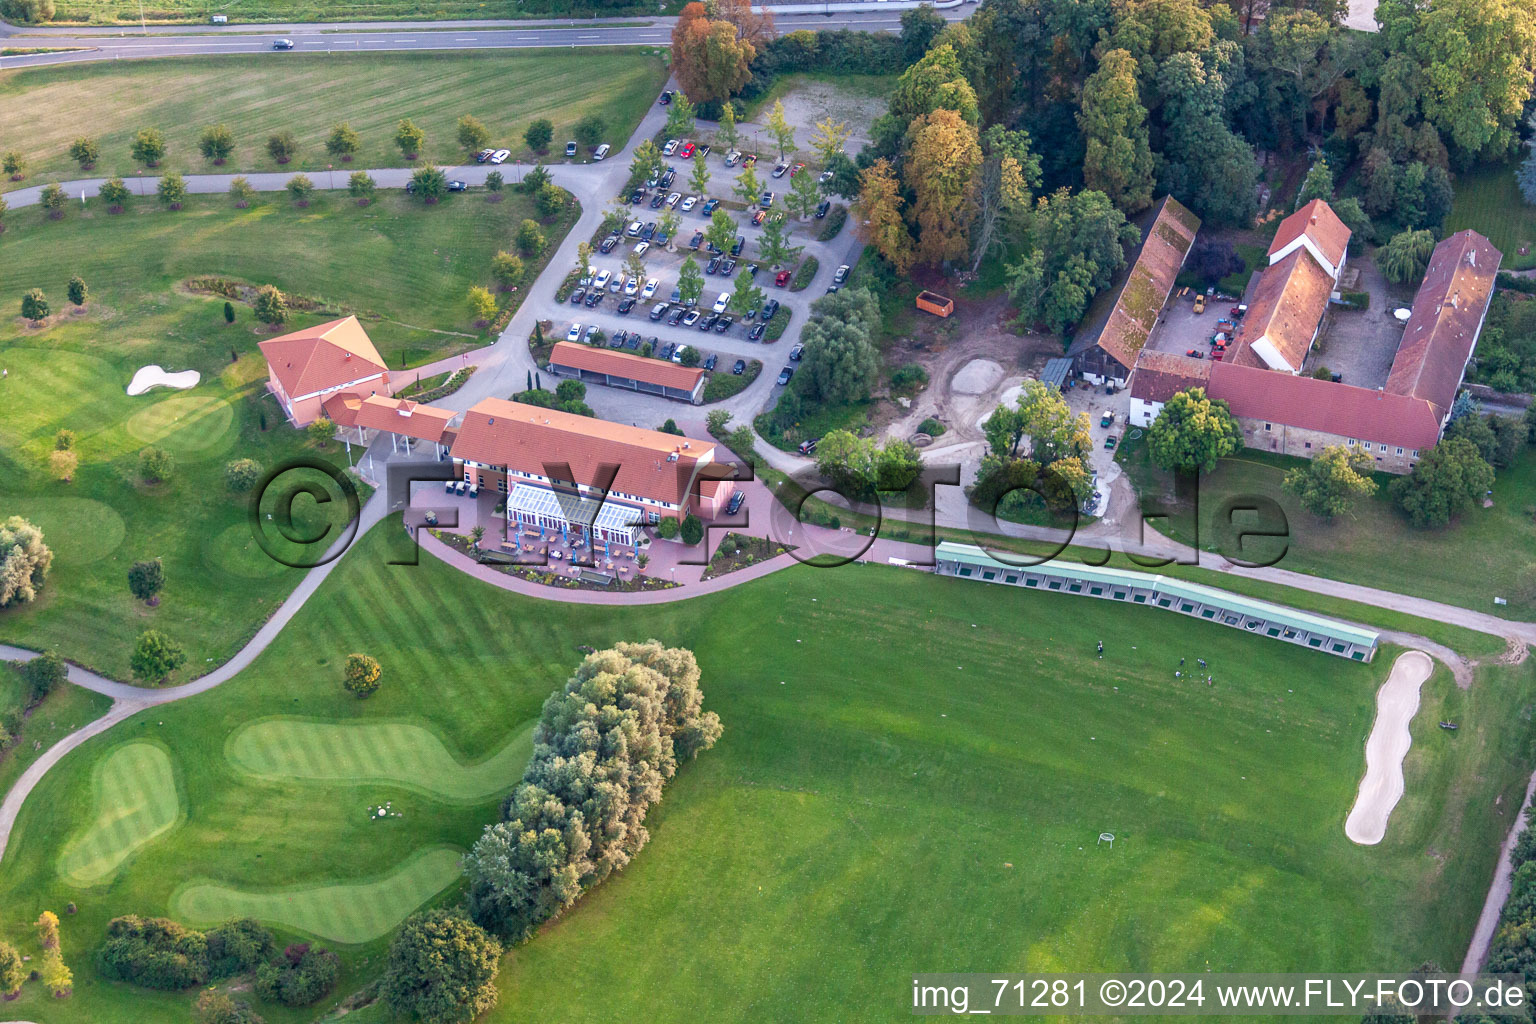 Grounds of the Golf course at Golfanlage Landgut Dreihof in Essingen in the state Rhineland-Palatinate from the drone perspective